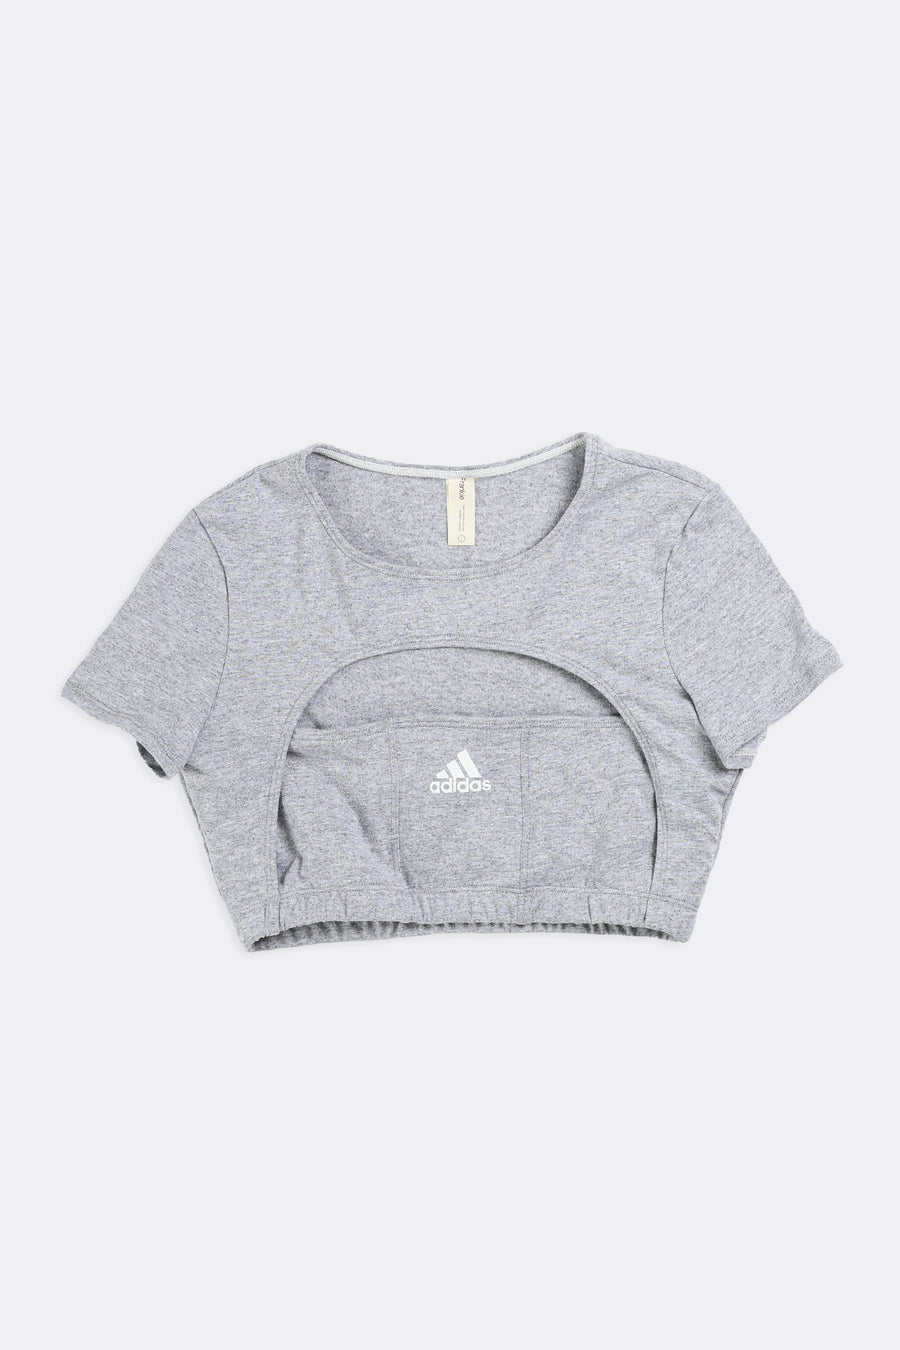 Rework Adidas Cut Out Tee - XS, S, M, L